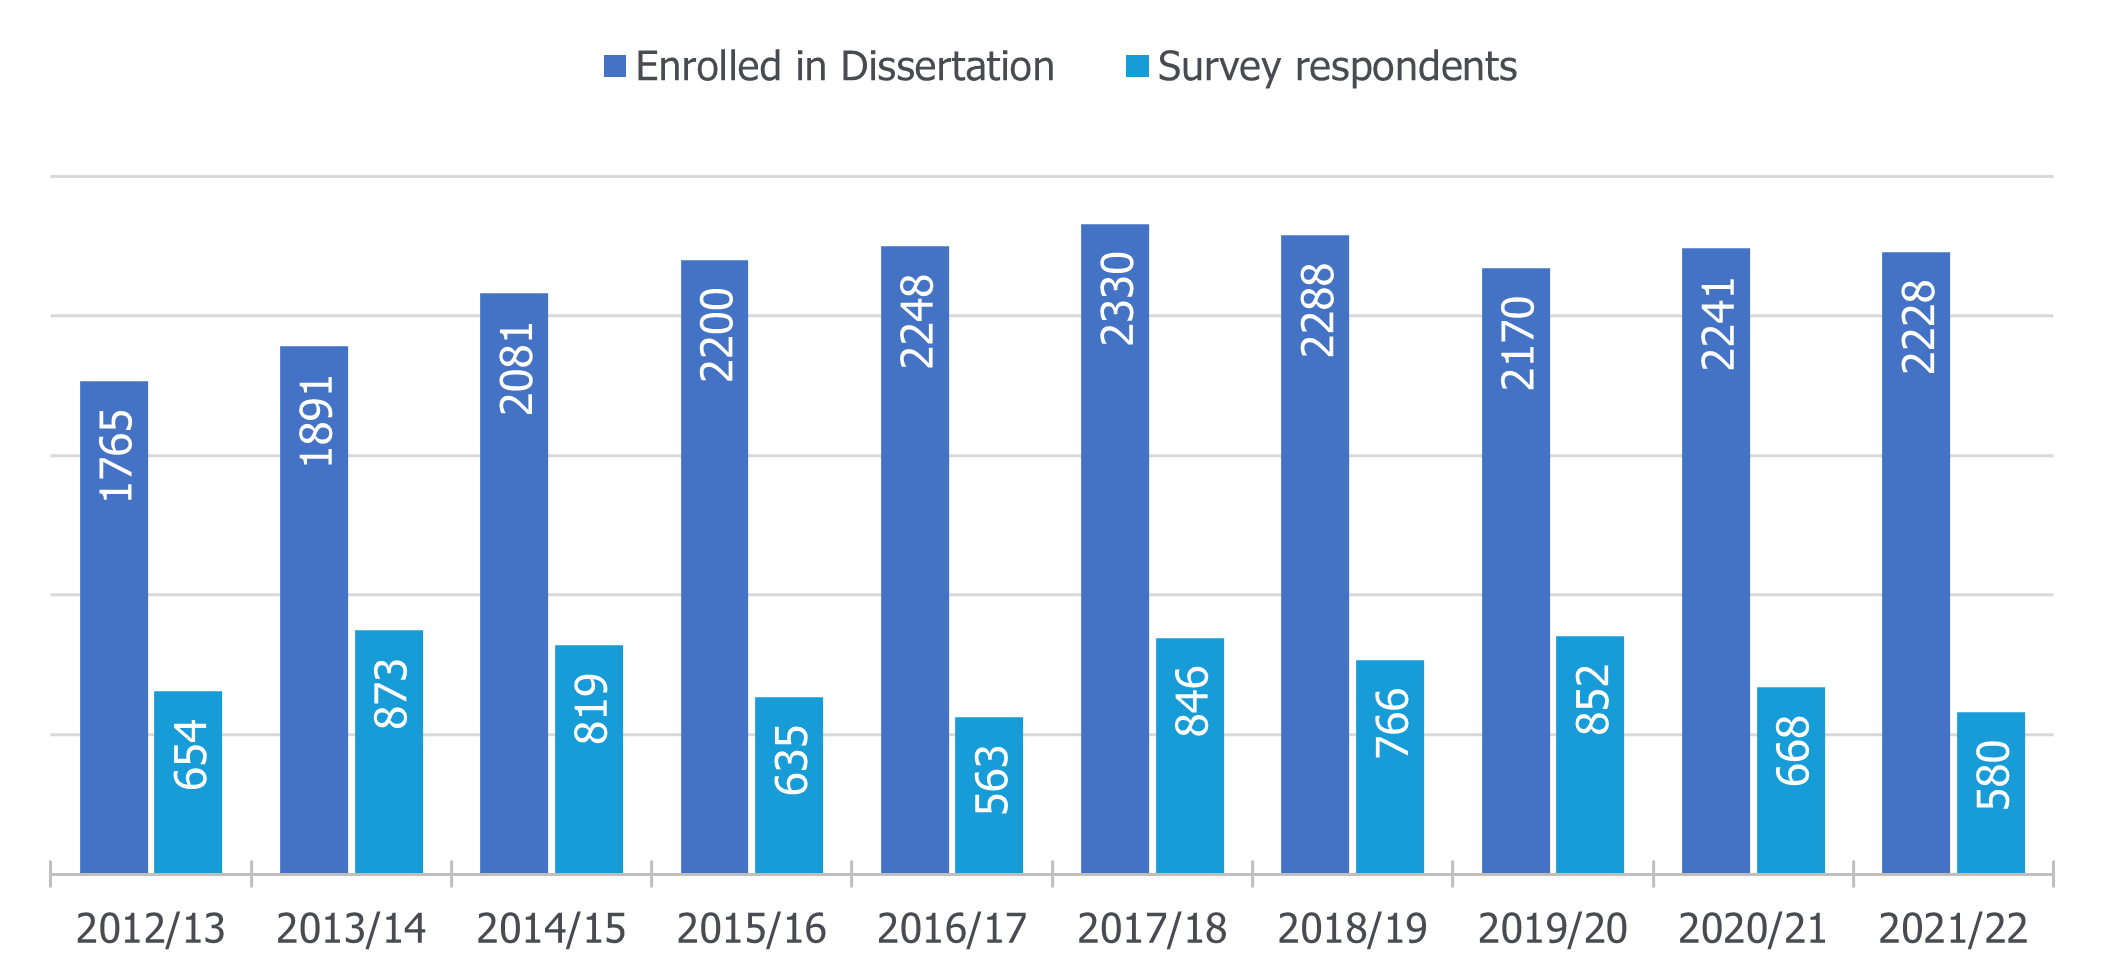 Total responses to the questionnaire between the academic years of 2012/13 and 2021/22 versus total respondents.